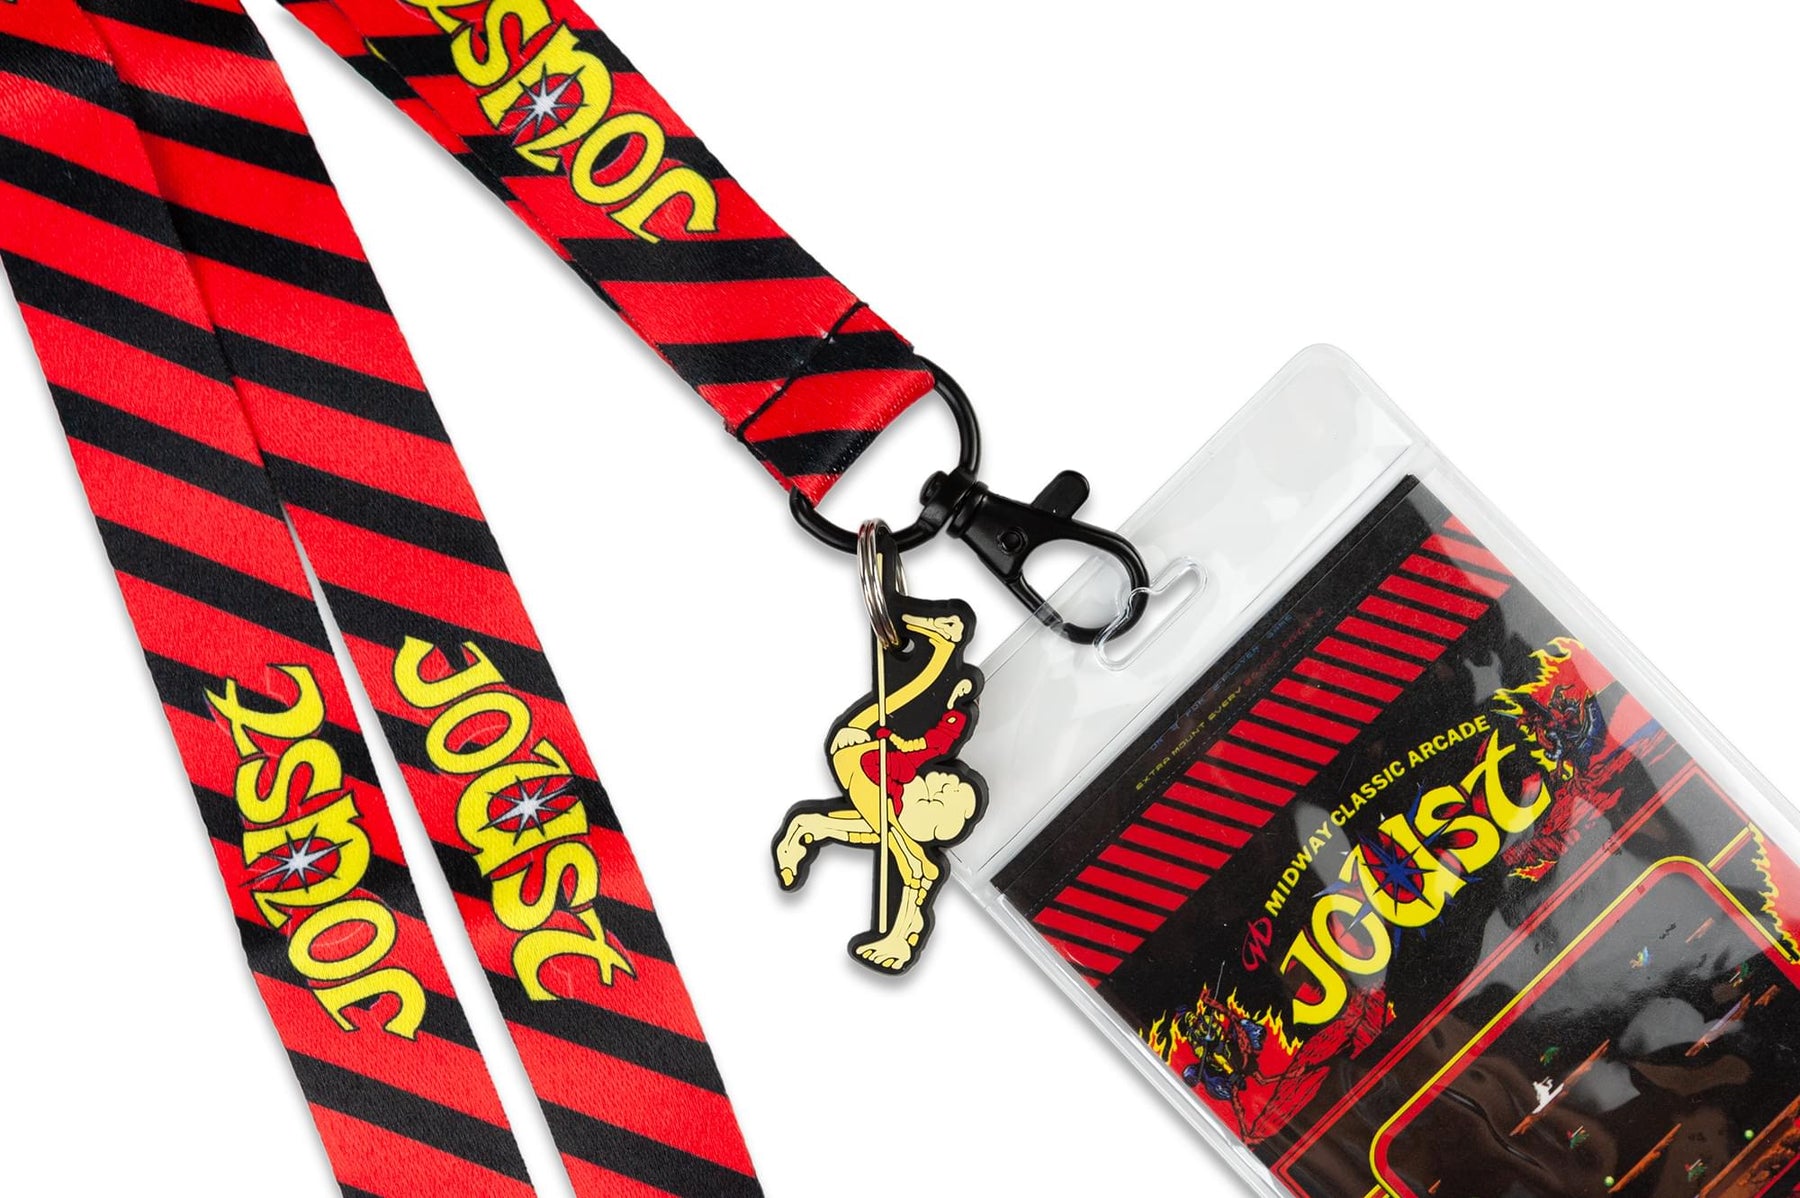 Midway Arcade Games Lanyard w/ ID Holder & Charm - Joust